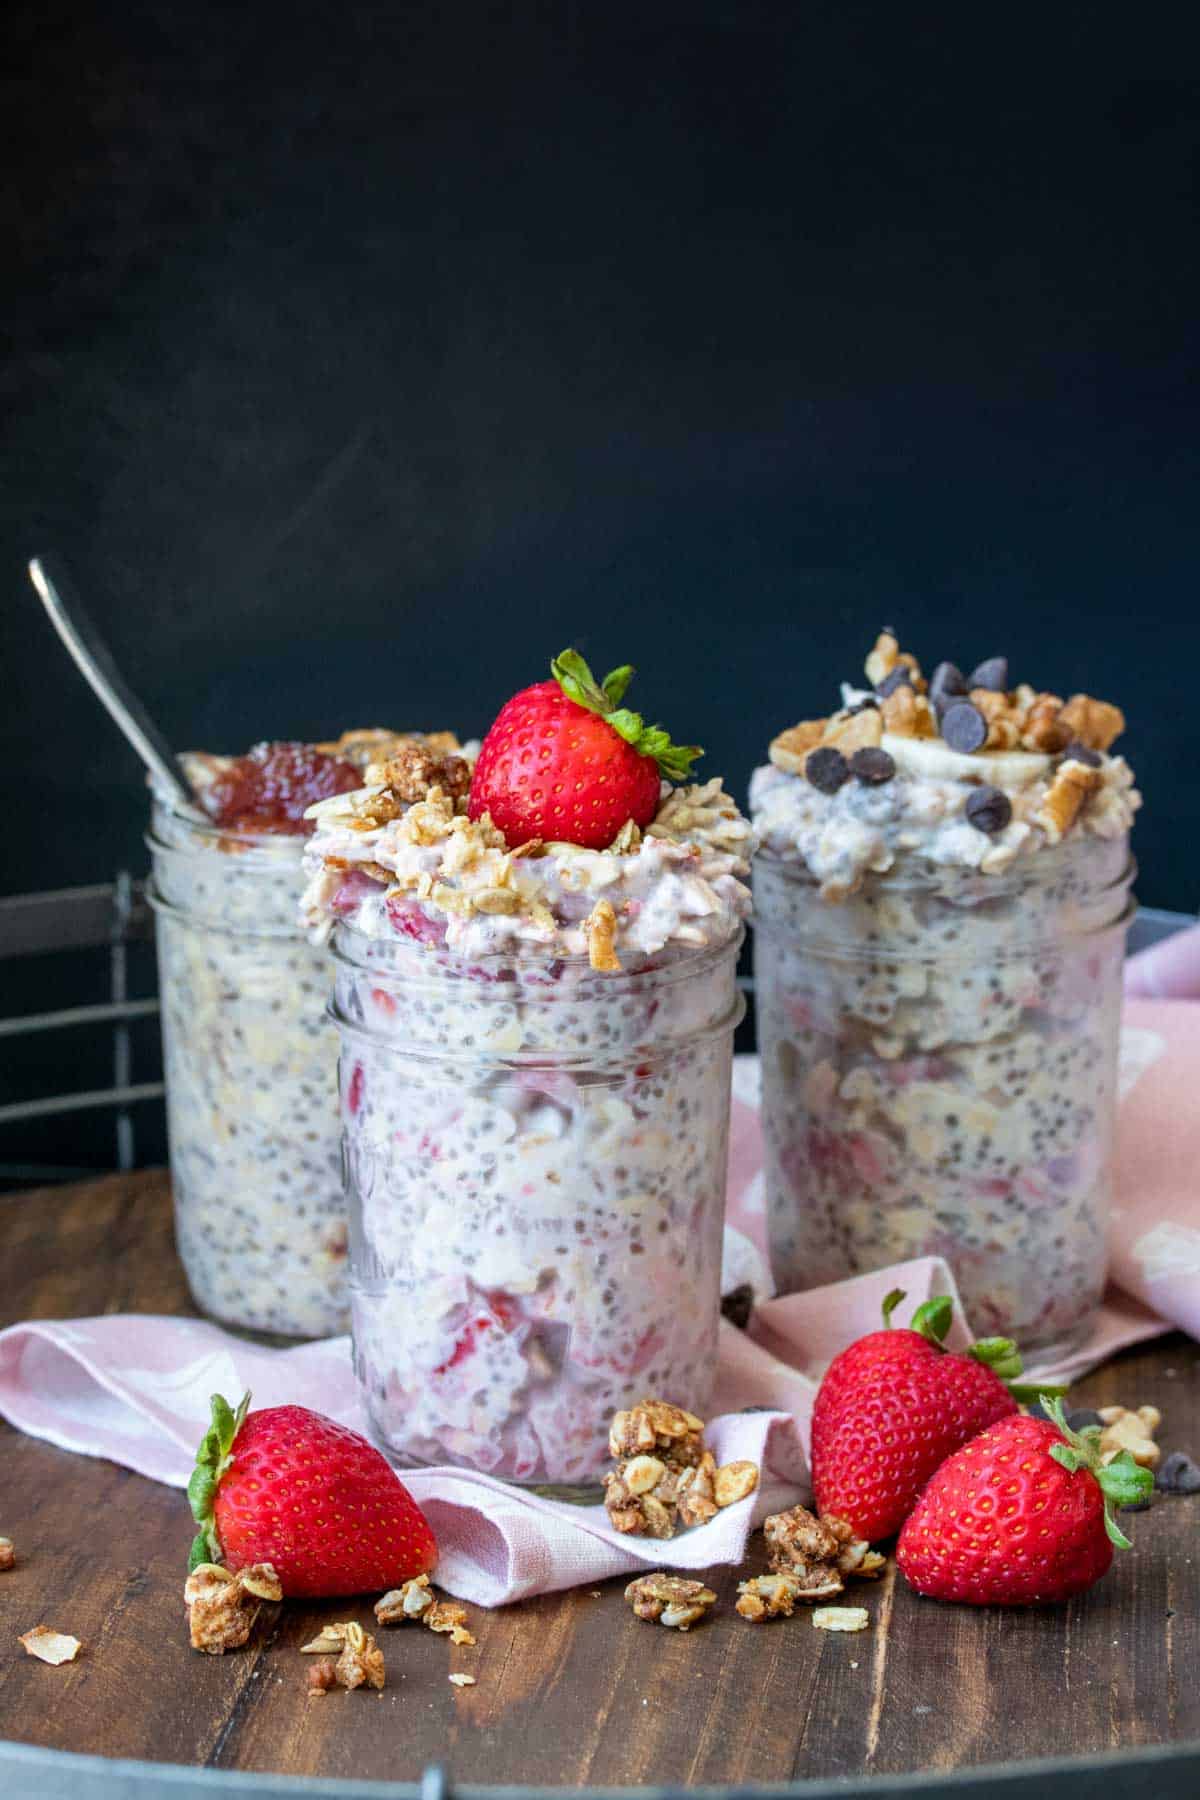 Three glass jars filled with different flavors of overnight oats sitting on a pink napkin on a wooden surface